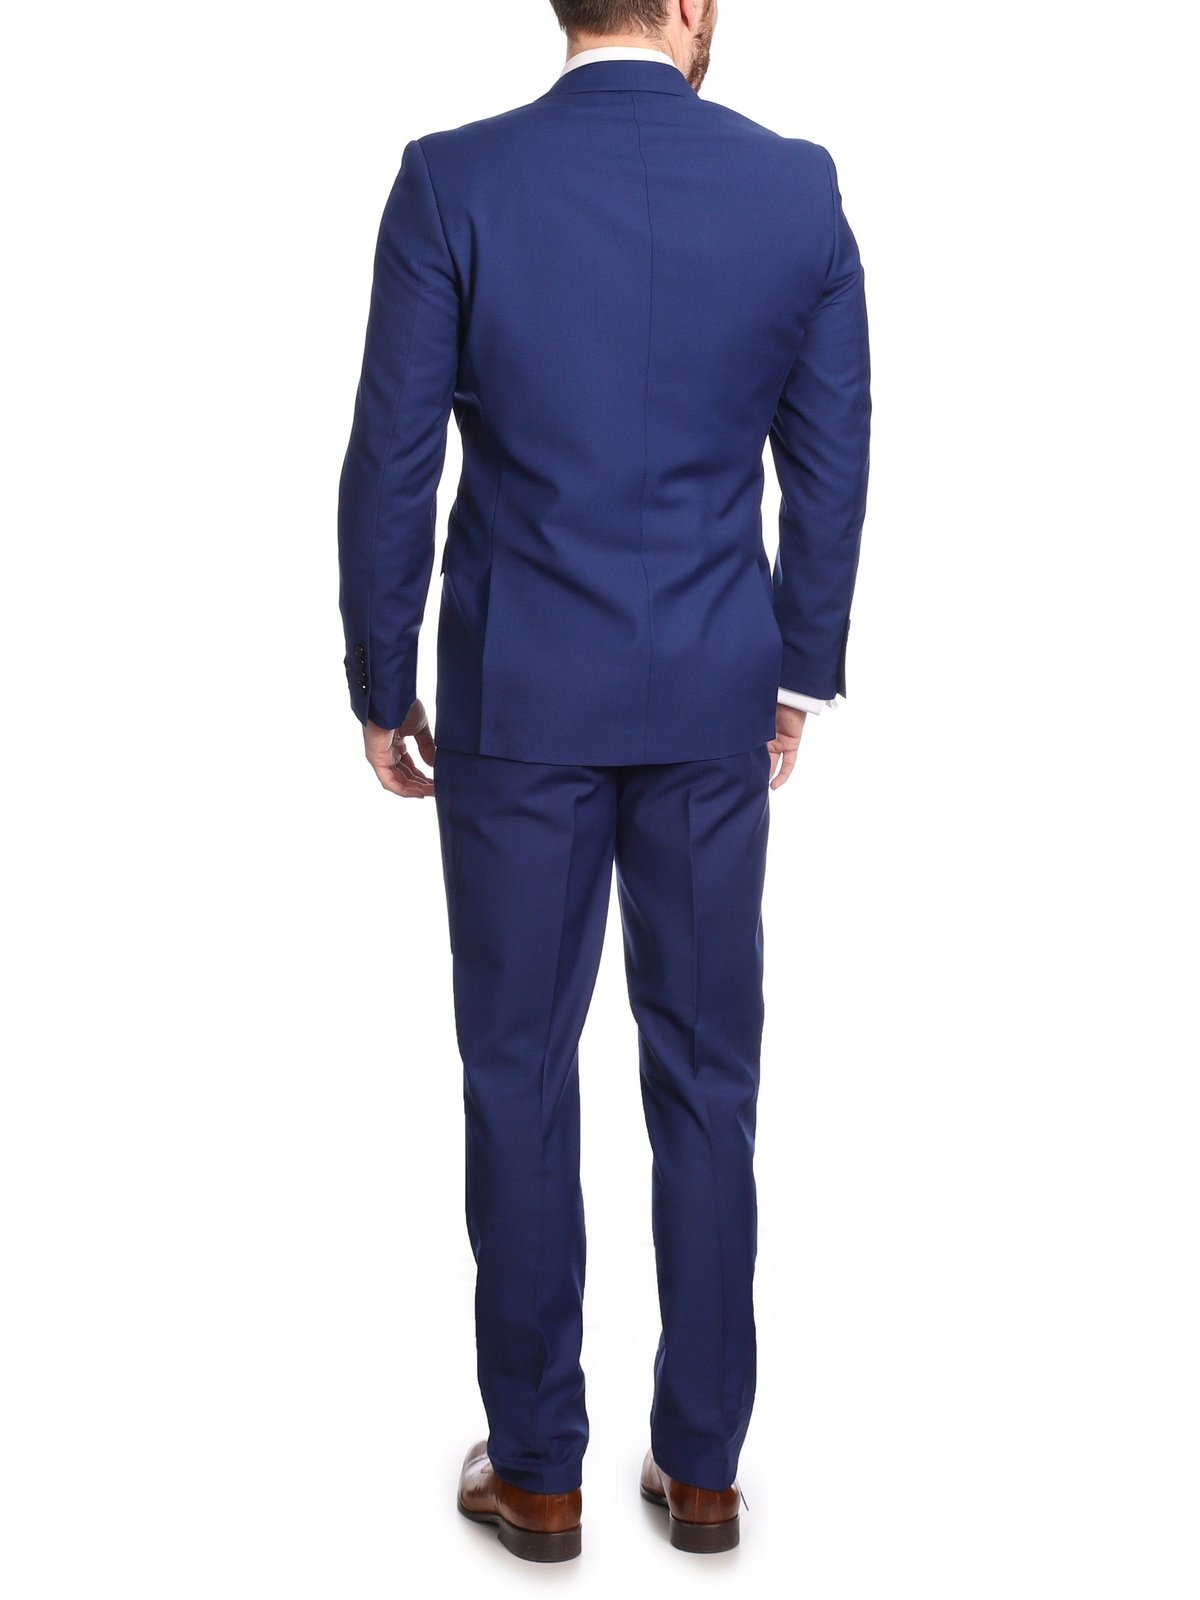 back view of French blue men's suit